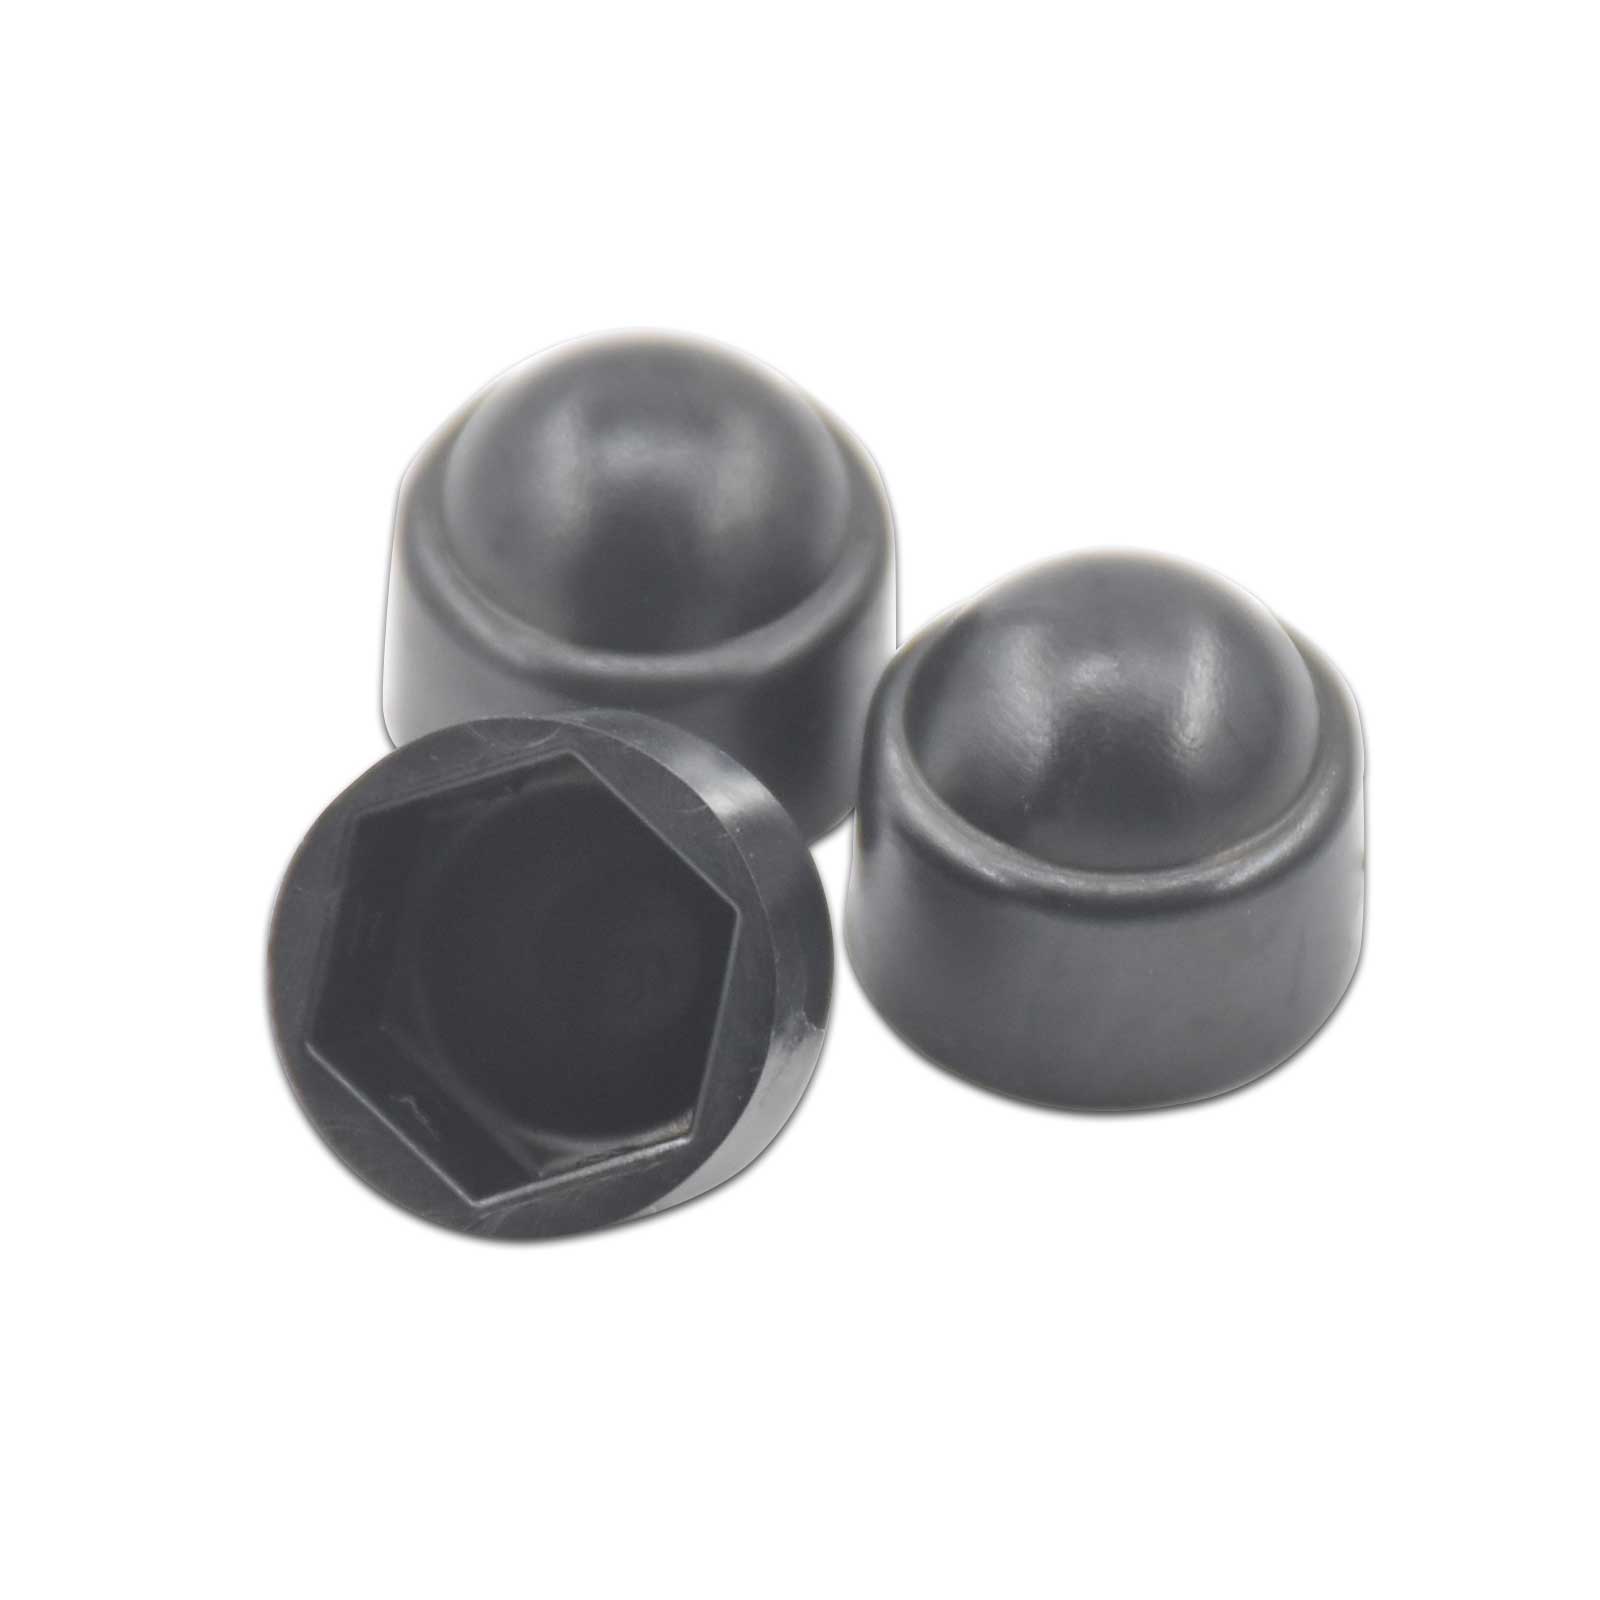 Plastic Cap For Bolts & Nuts - M10